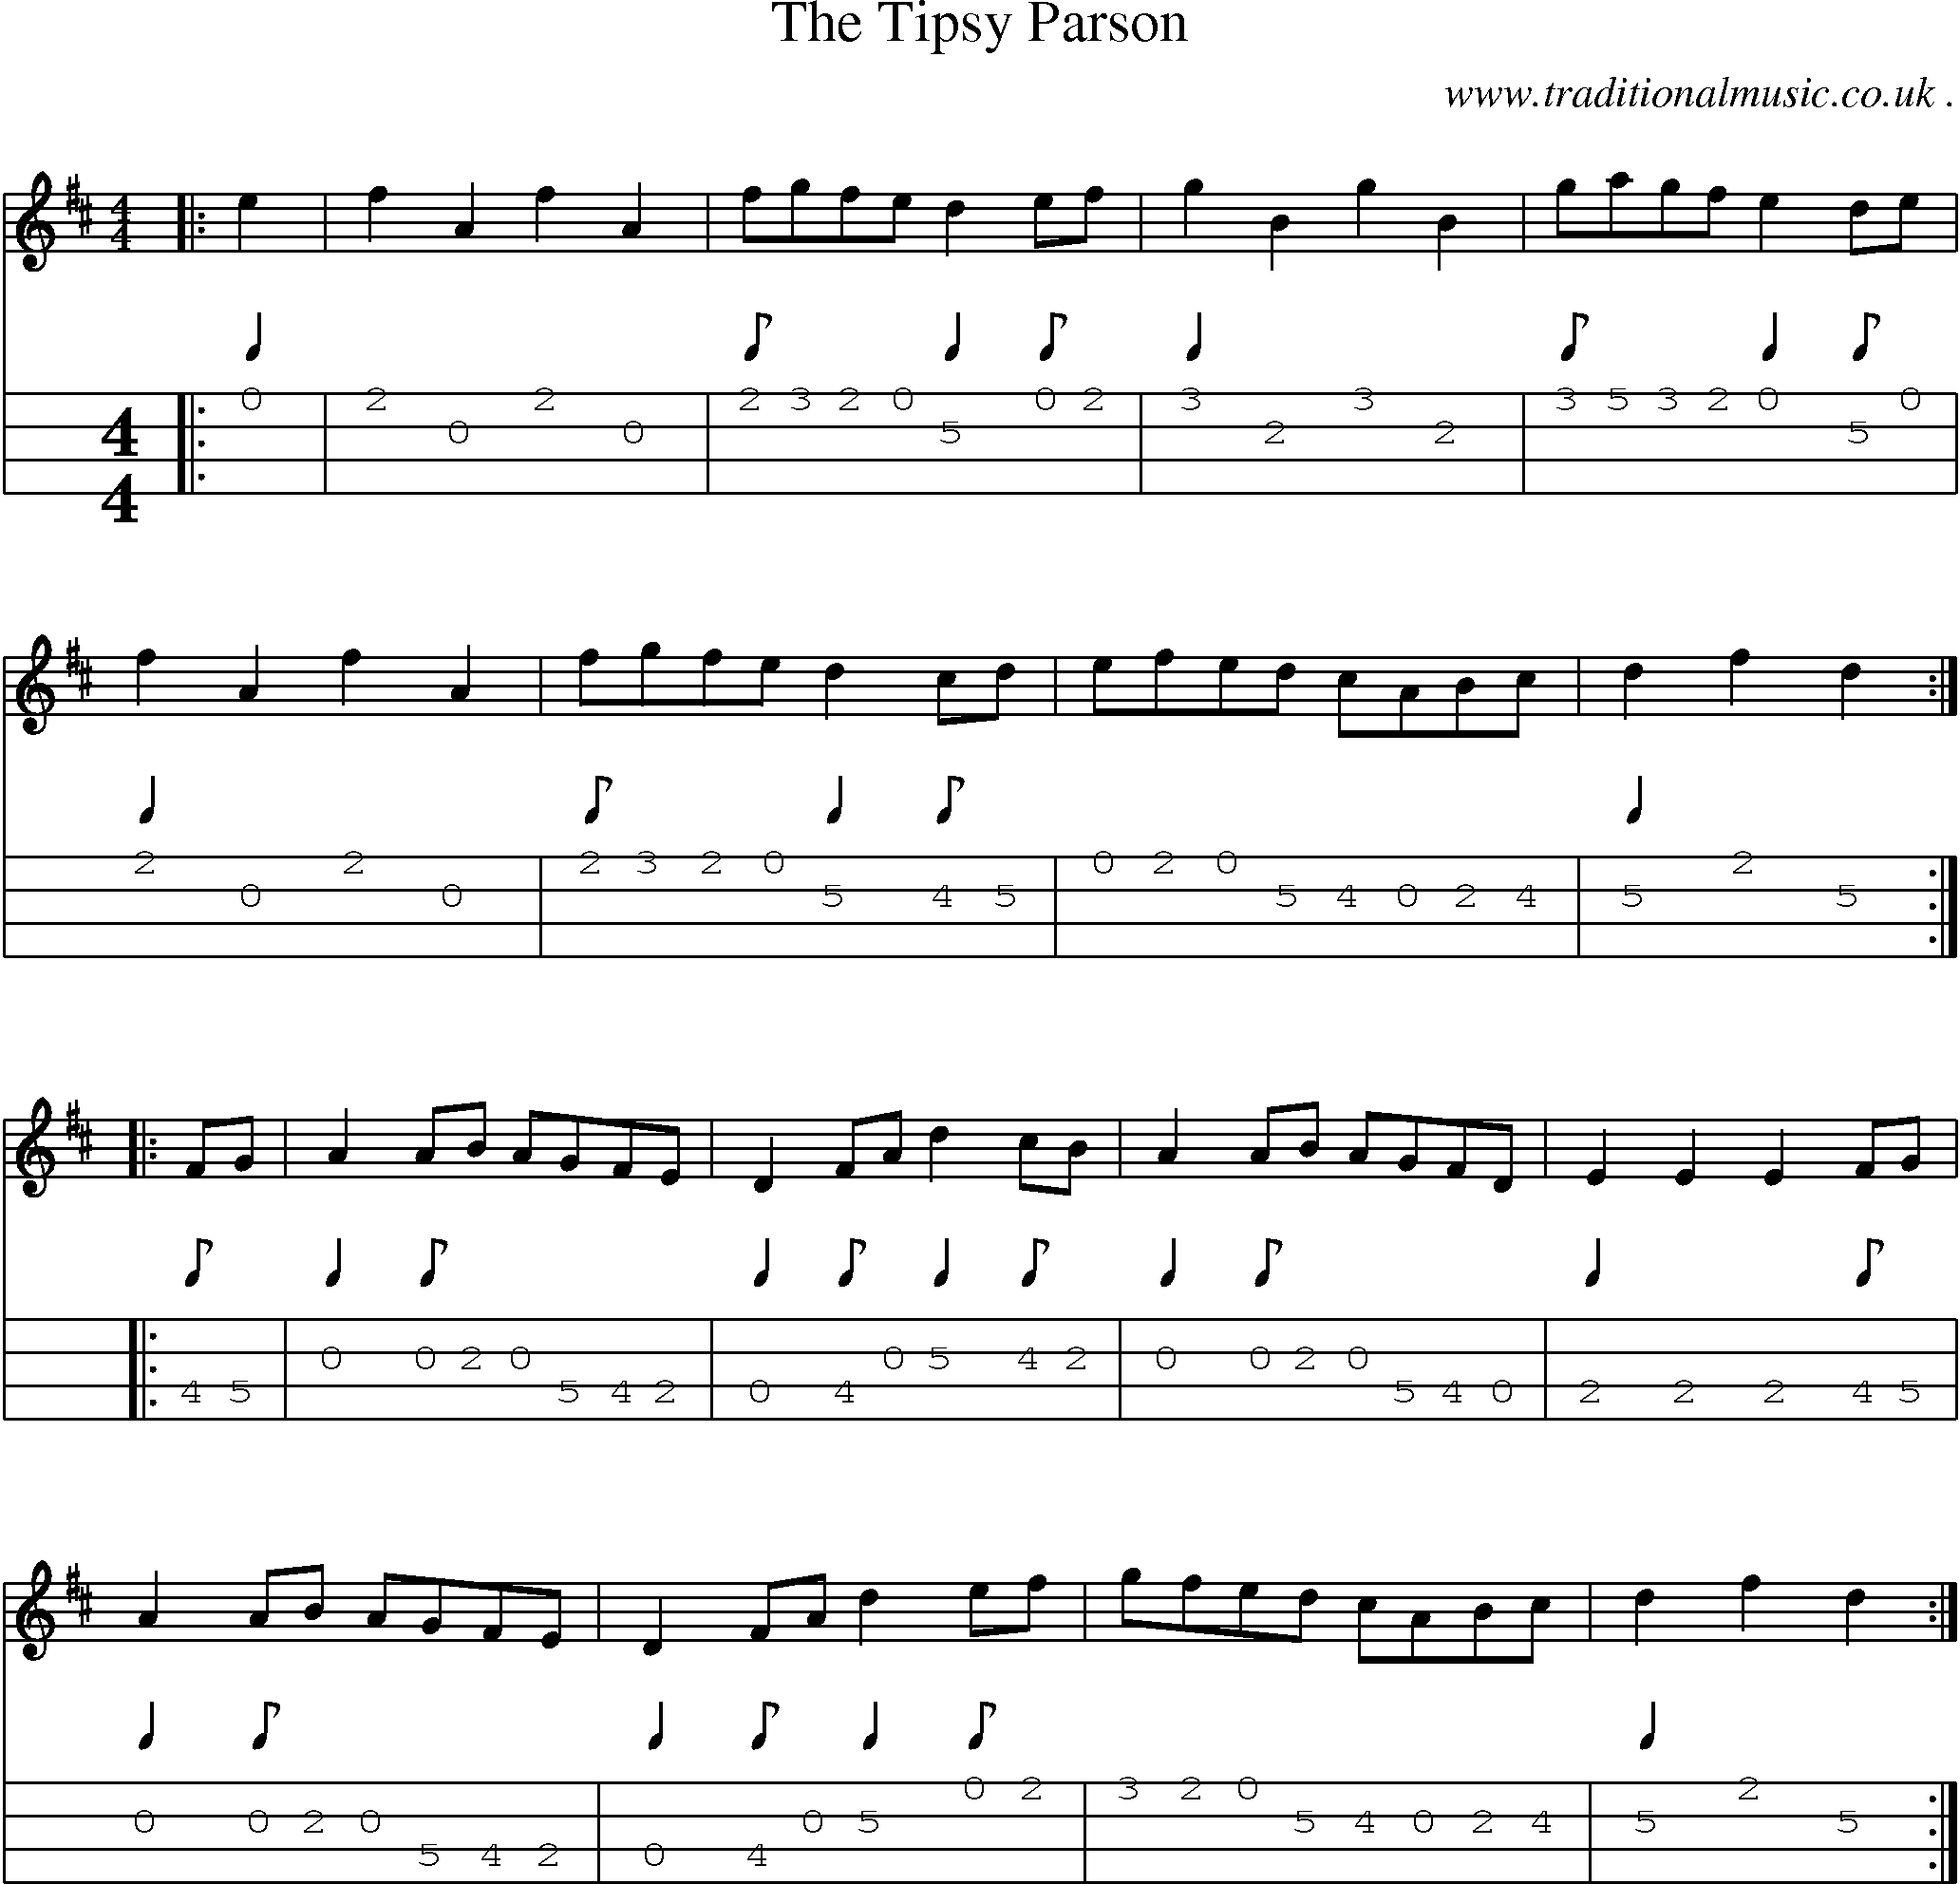 Music Score and Guitar Tabs for The Tipsy Parson